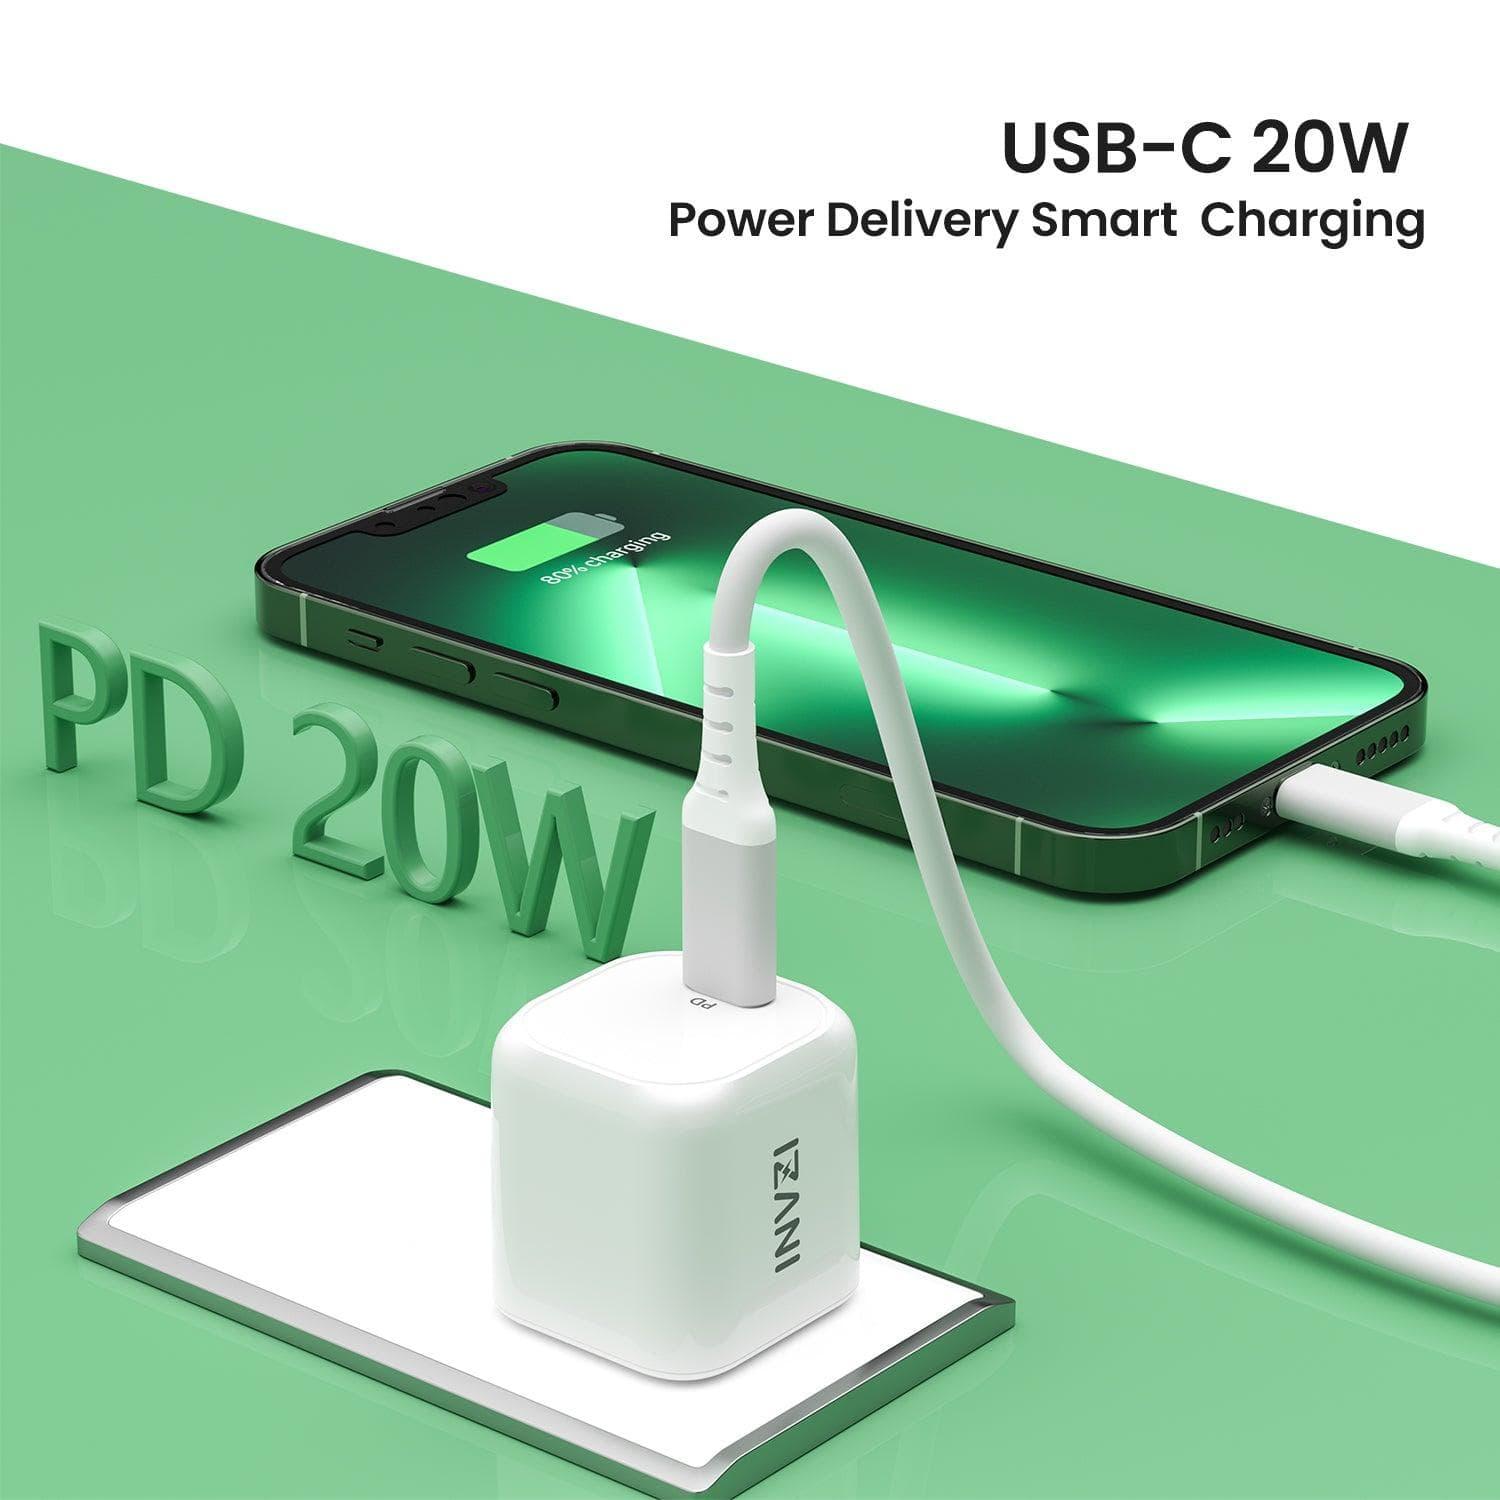 INVZI Power Adapters & Chargers iPhone Charger 20W【Apple MFi Certified】PD USB-C Charger with 6.6ft MFi Lightning Cable